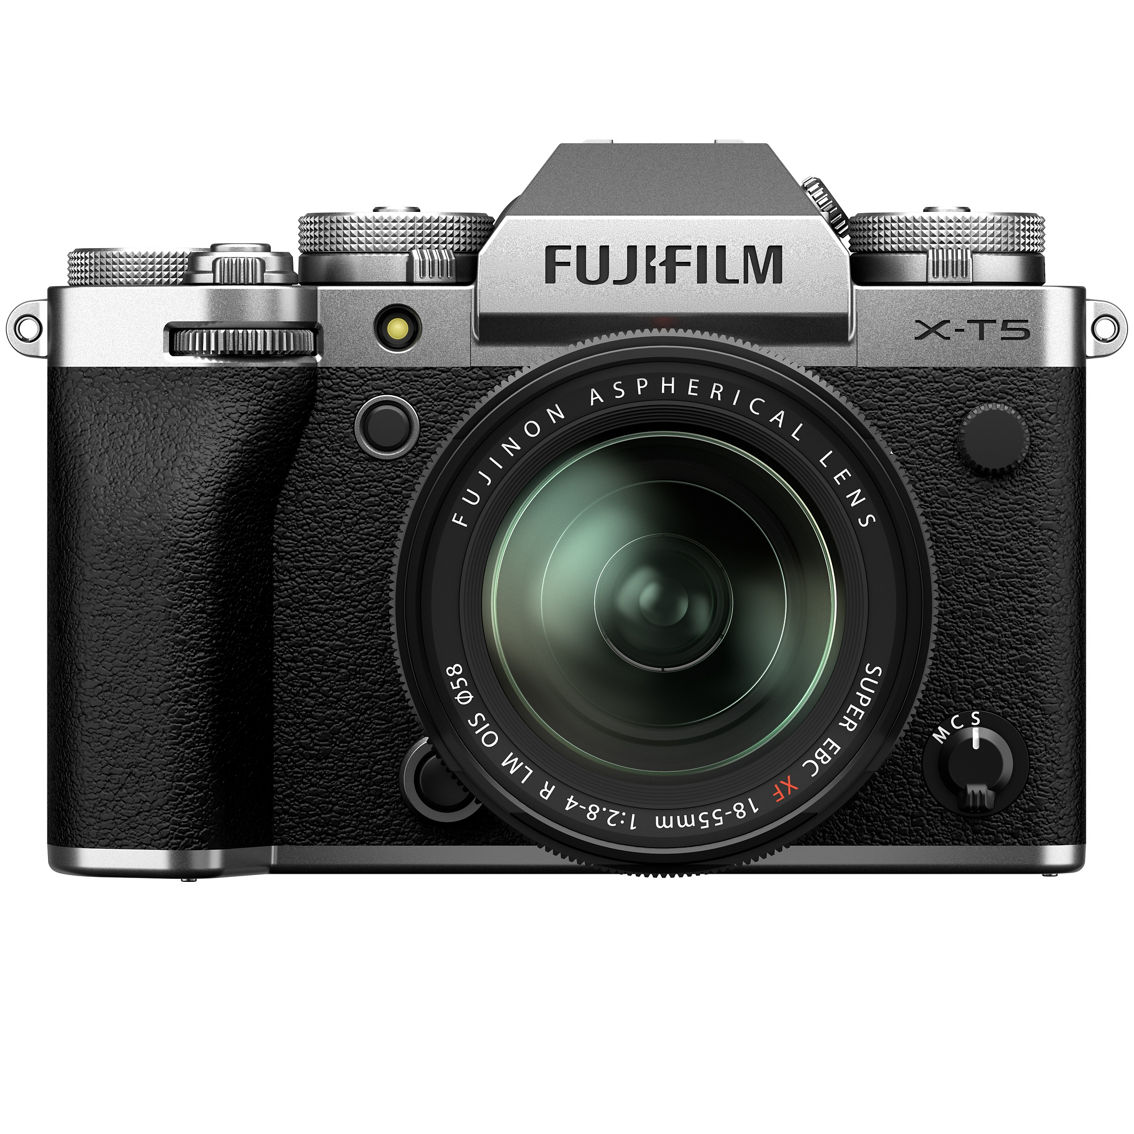 Fujifilm XT5 Mirrorless Camera Body and Silver XF 18 to 55mm F2.8-4 R LM OIS Lens - Image 2 of 7